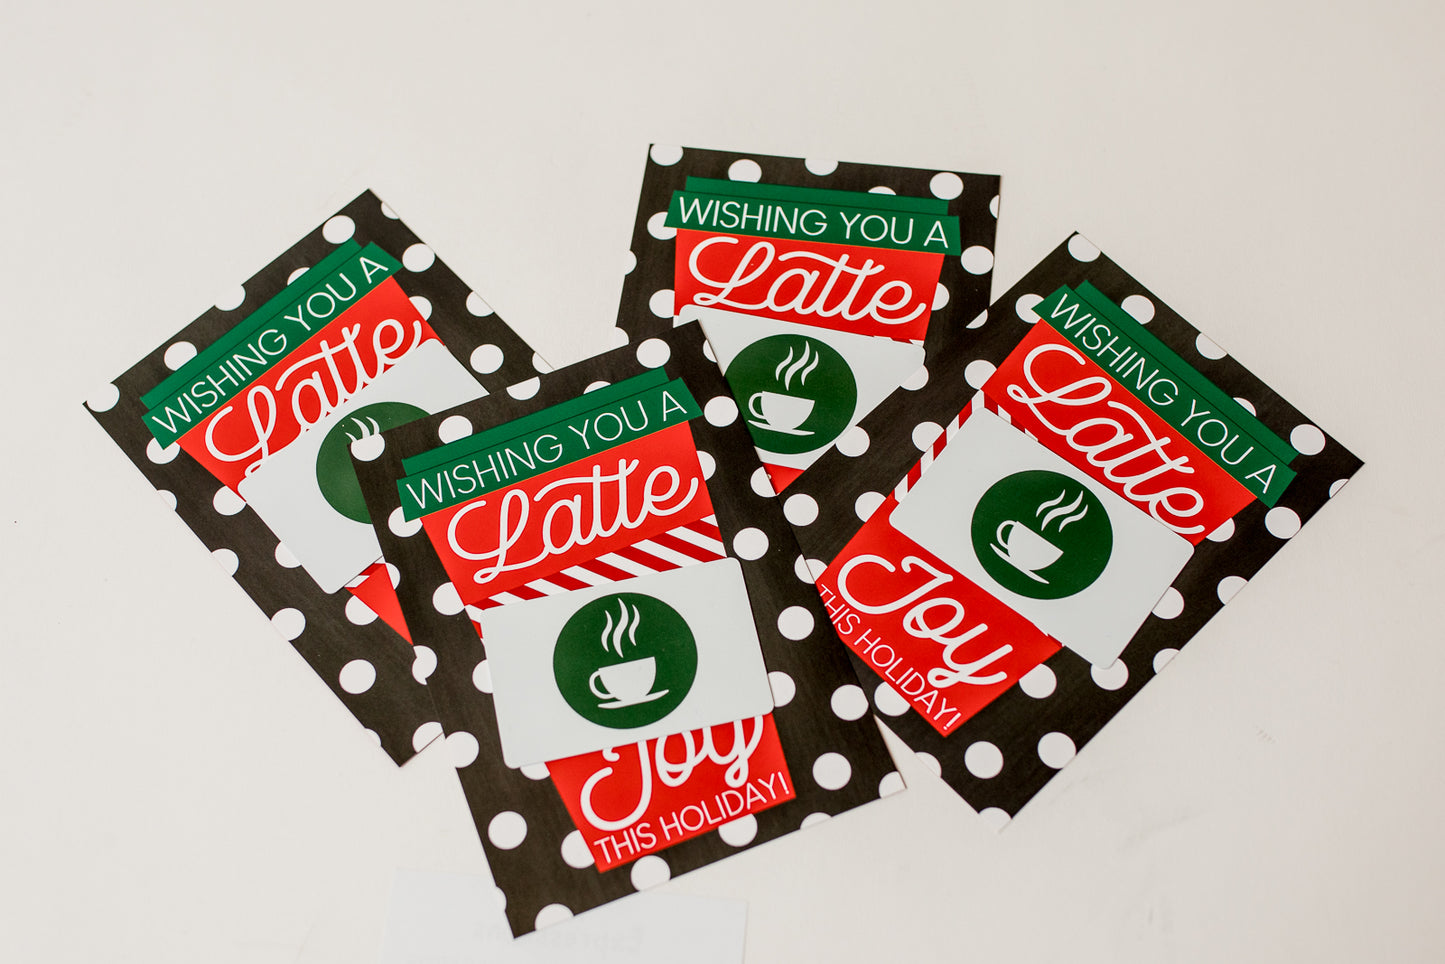 Tiny Expressions – Holiday Coffee Gift Card Holders (4 Pack) | Christmas Set of 4 with Envelopes | Thanks a Latte Themed 5"x7" Appreciation Gifts for Teachers, Staff, Nurses, Customers & Admins